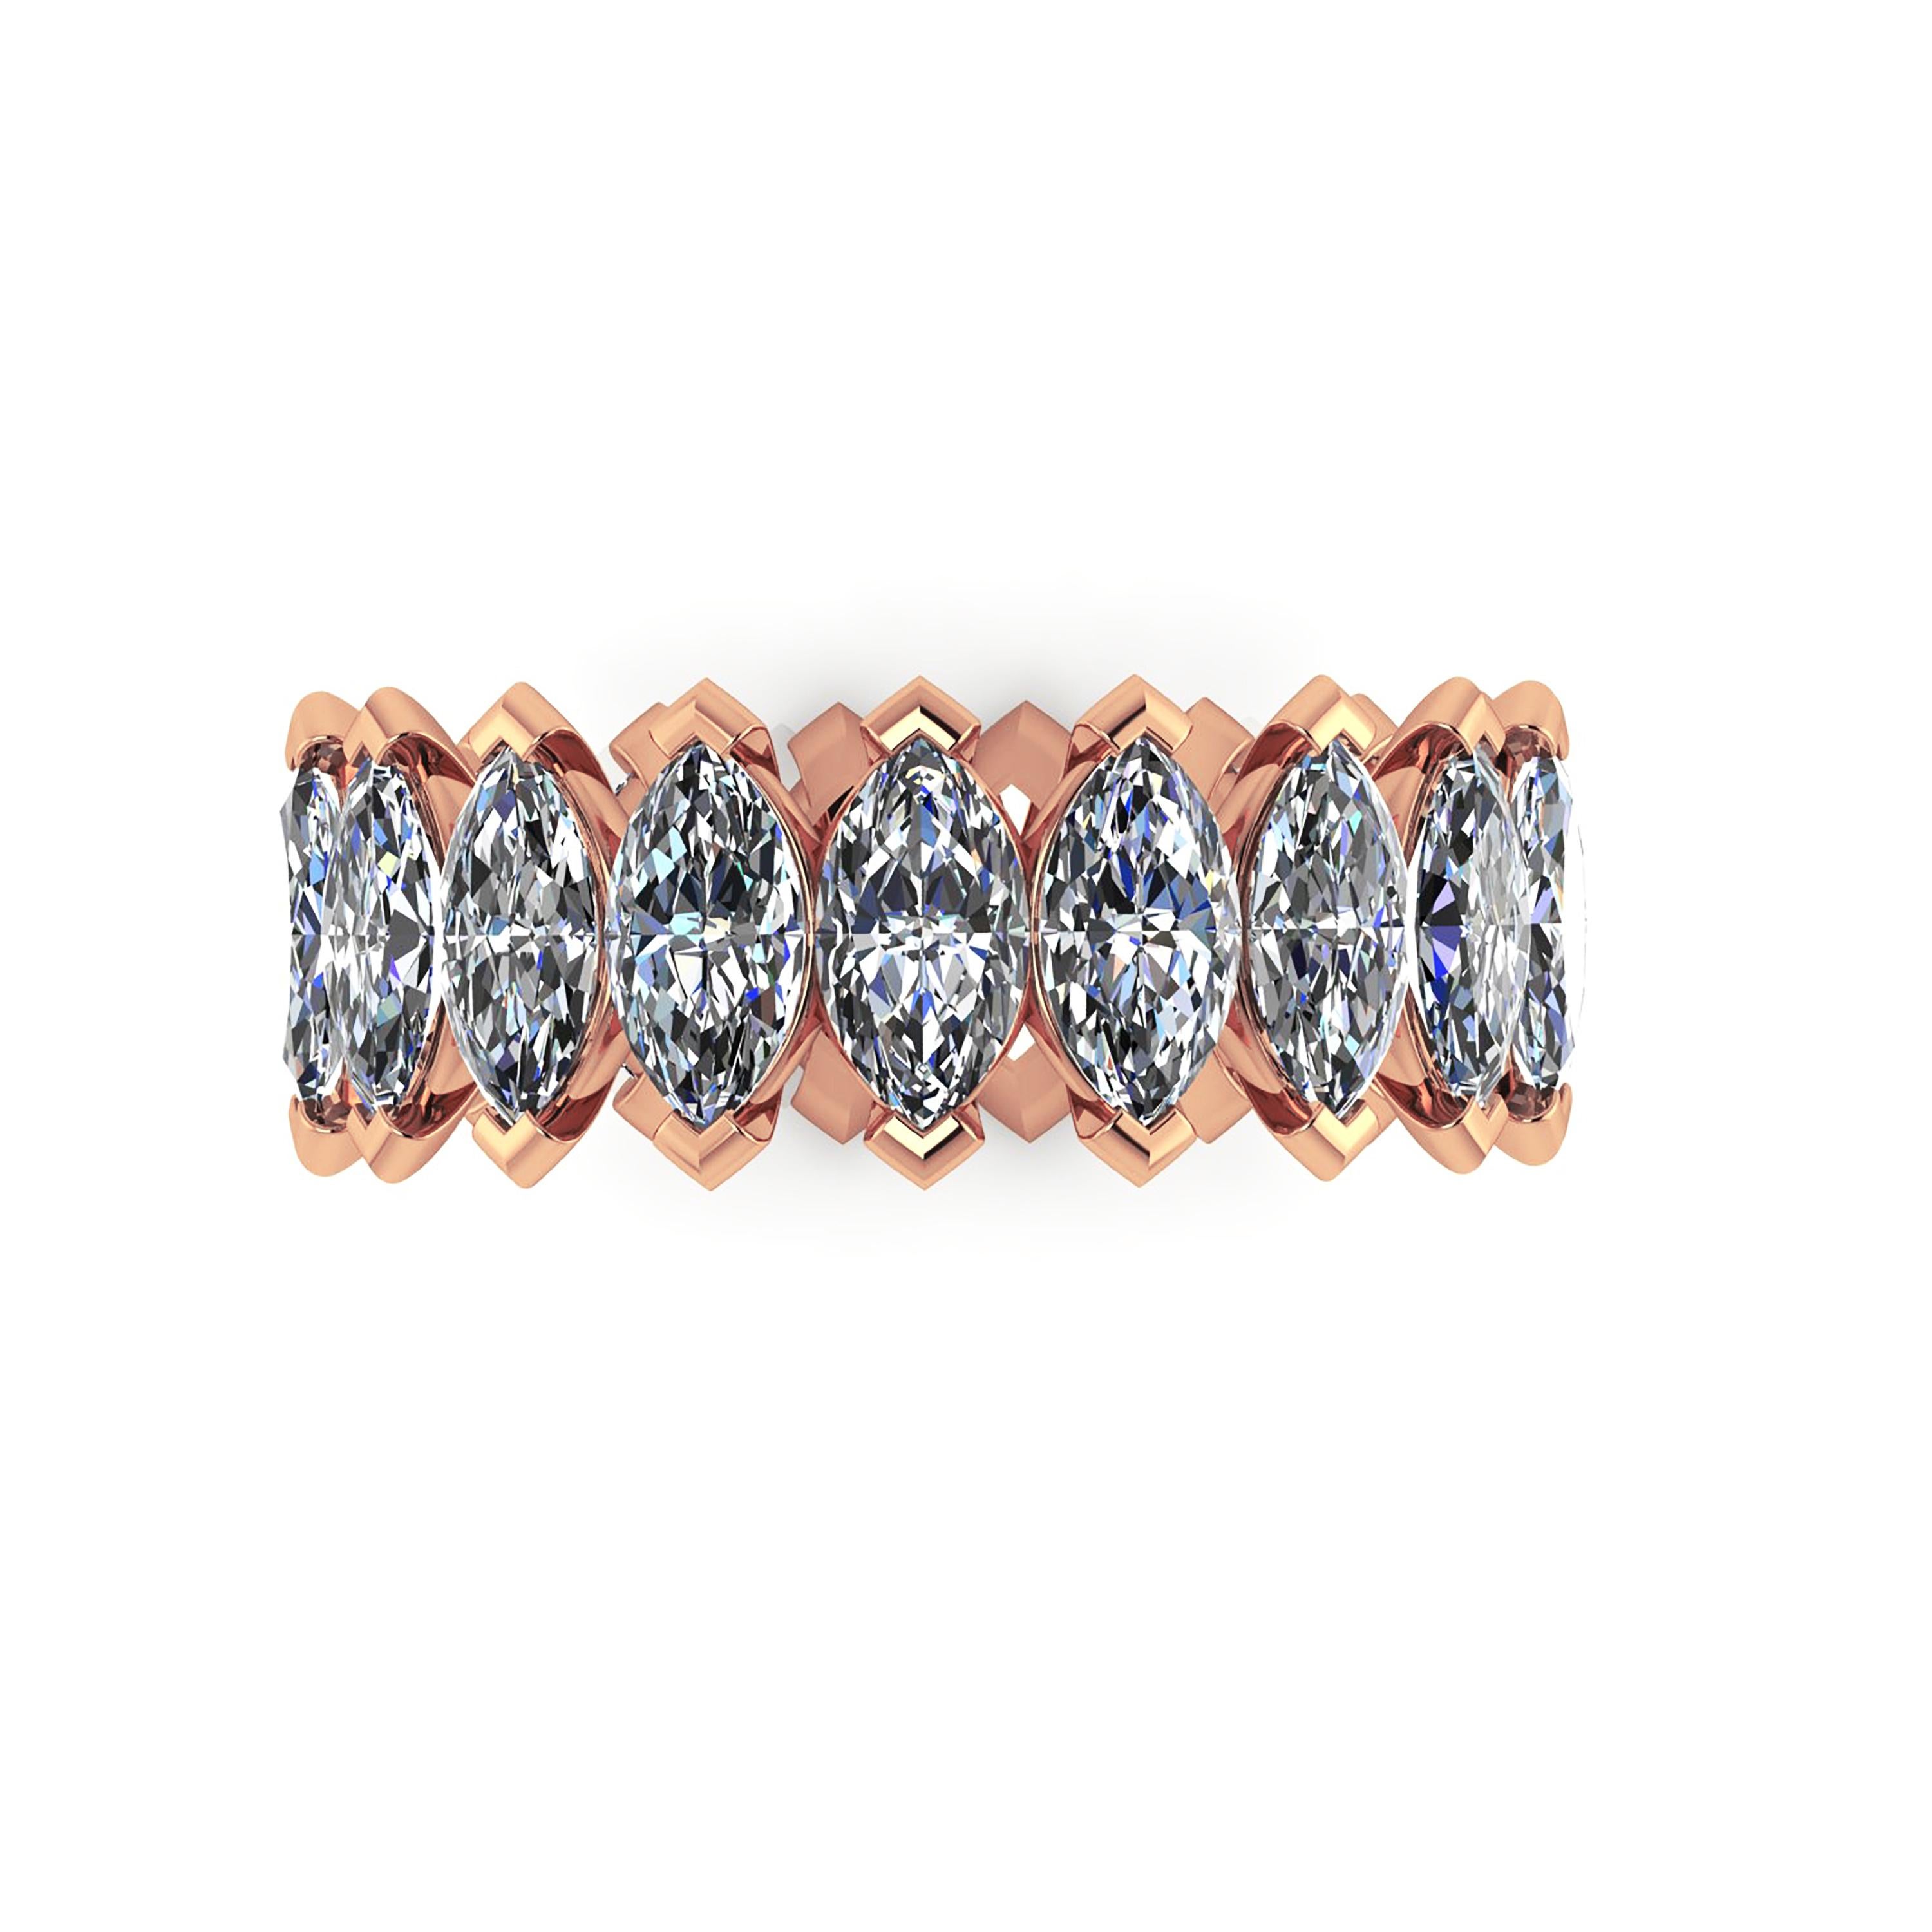 A classic FERRUCCI 4.70 carats of bright white diamonds G color, VS clarity, set to perfection in a hand crafted 18k Rose gold eternity band, 7 mm wide, stackable collection, made in New York with the best Italian craftsmanship, size 6,